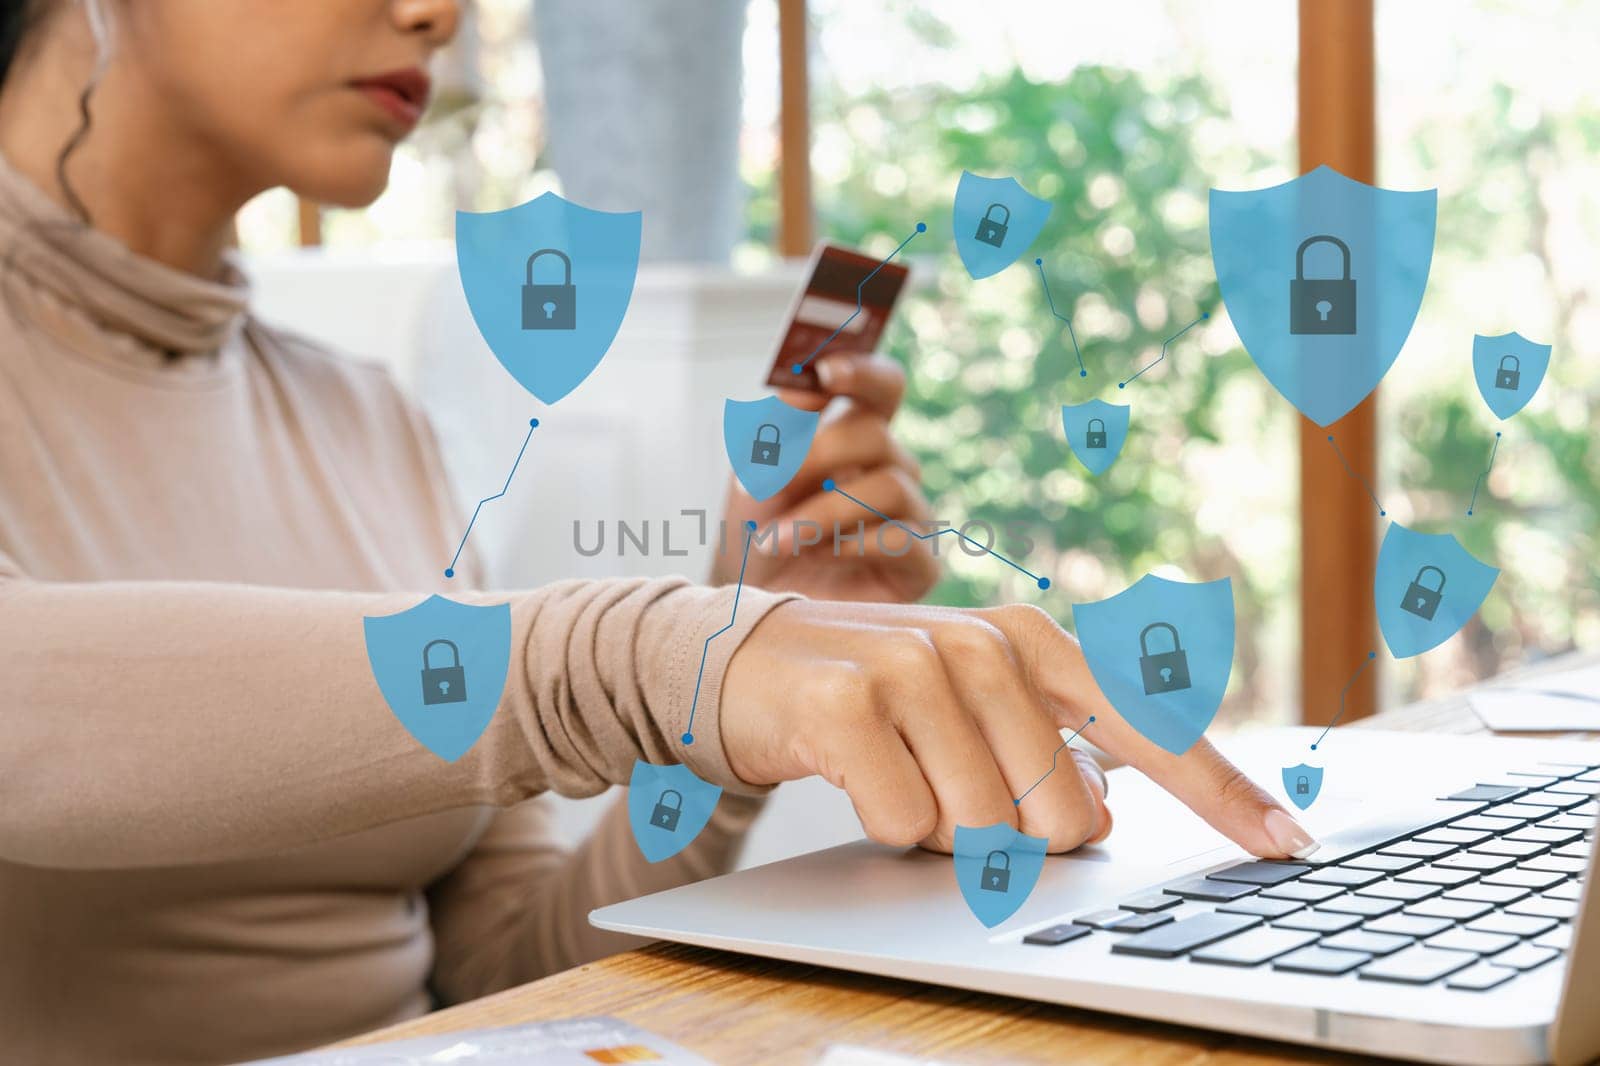 Elegant customer wearing brown sweater controlling laptop screen opening hologram graphic interface of technology security, identity protection system, using credit card for authentication. Cybercash.